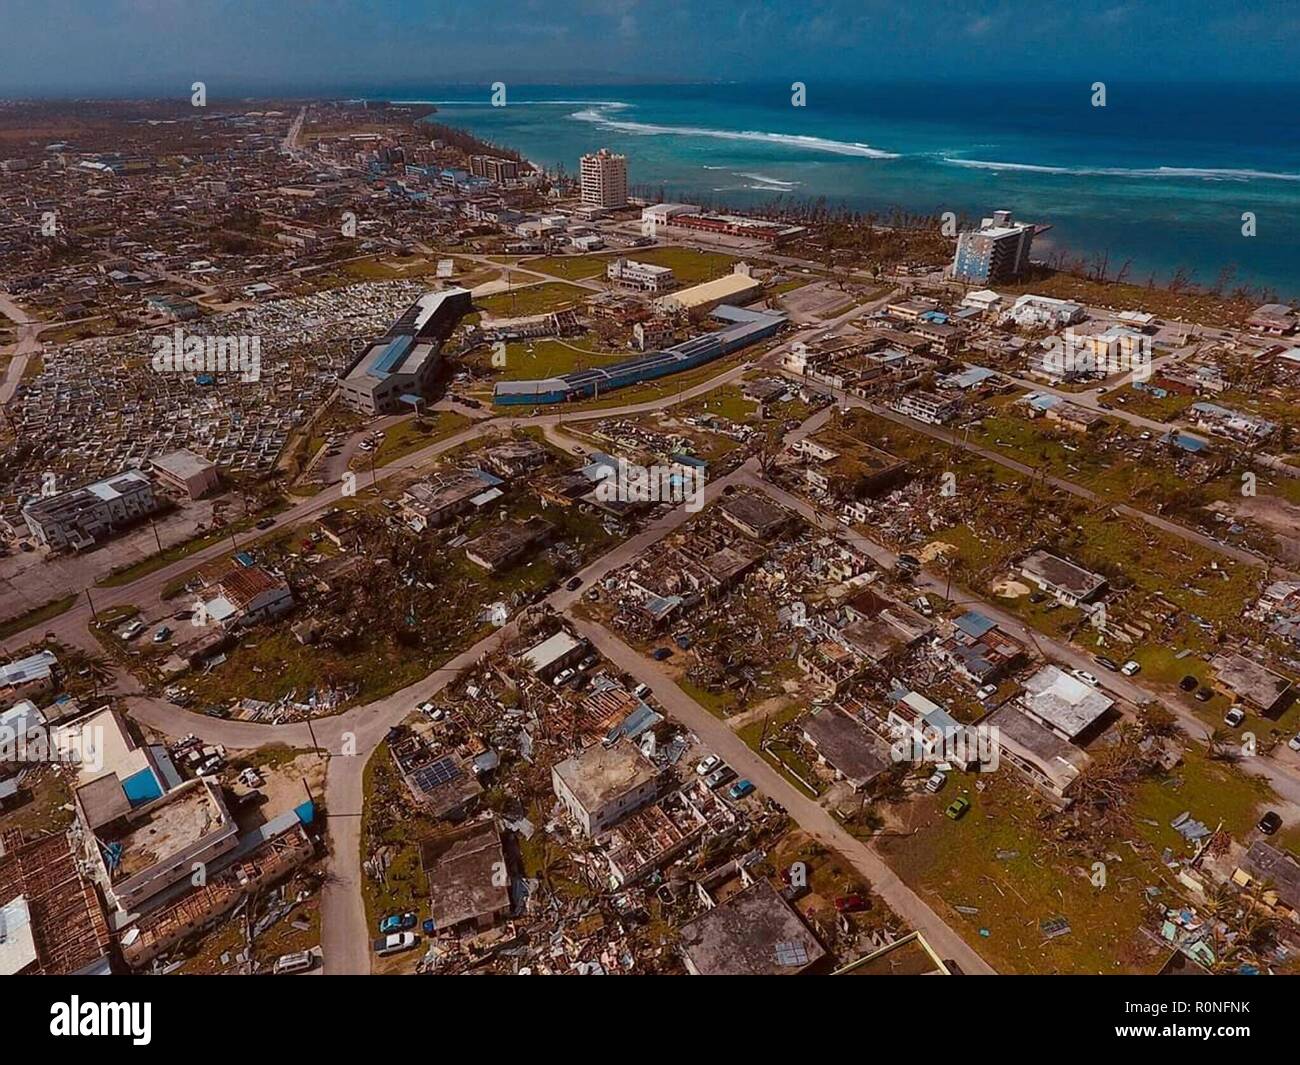 An aerial photo showing the southern end of Saipan almost completely destroyed by Super Typhoon Yutu November 4, 2018 in Saipan, Commonwealth of the Northern Mariana Islands. The islands were devastated by Typhoon Yutu on October 28th, the strongest typhoon to impact the Mariana Islands on record. Stock Photo